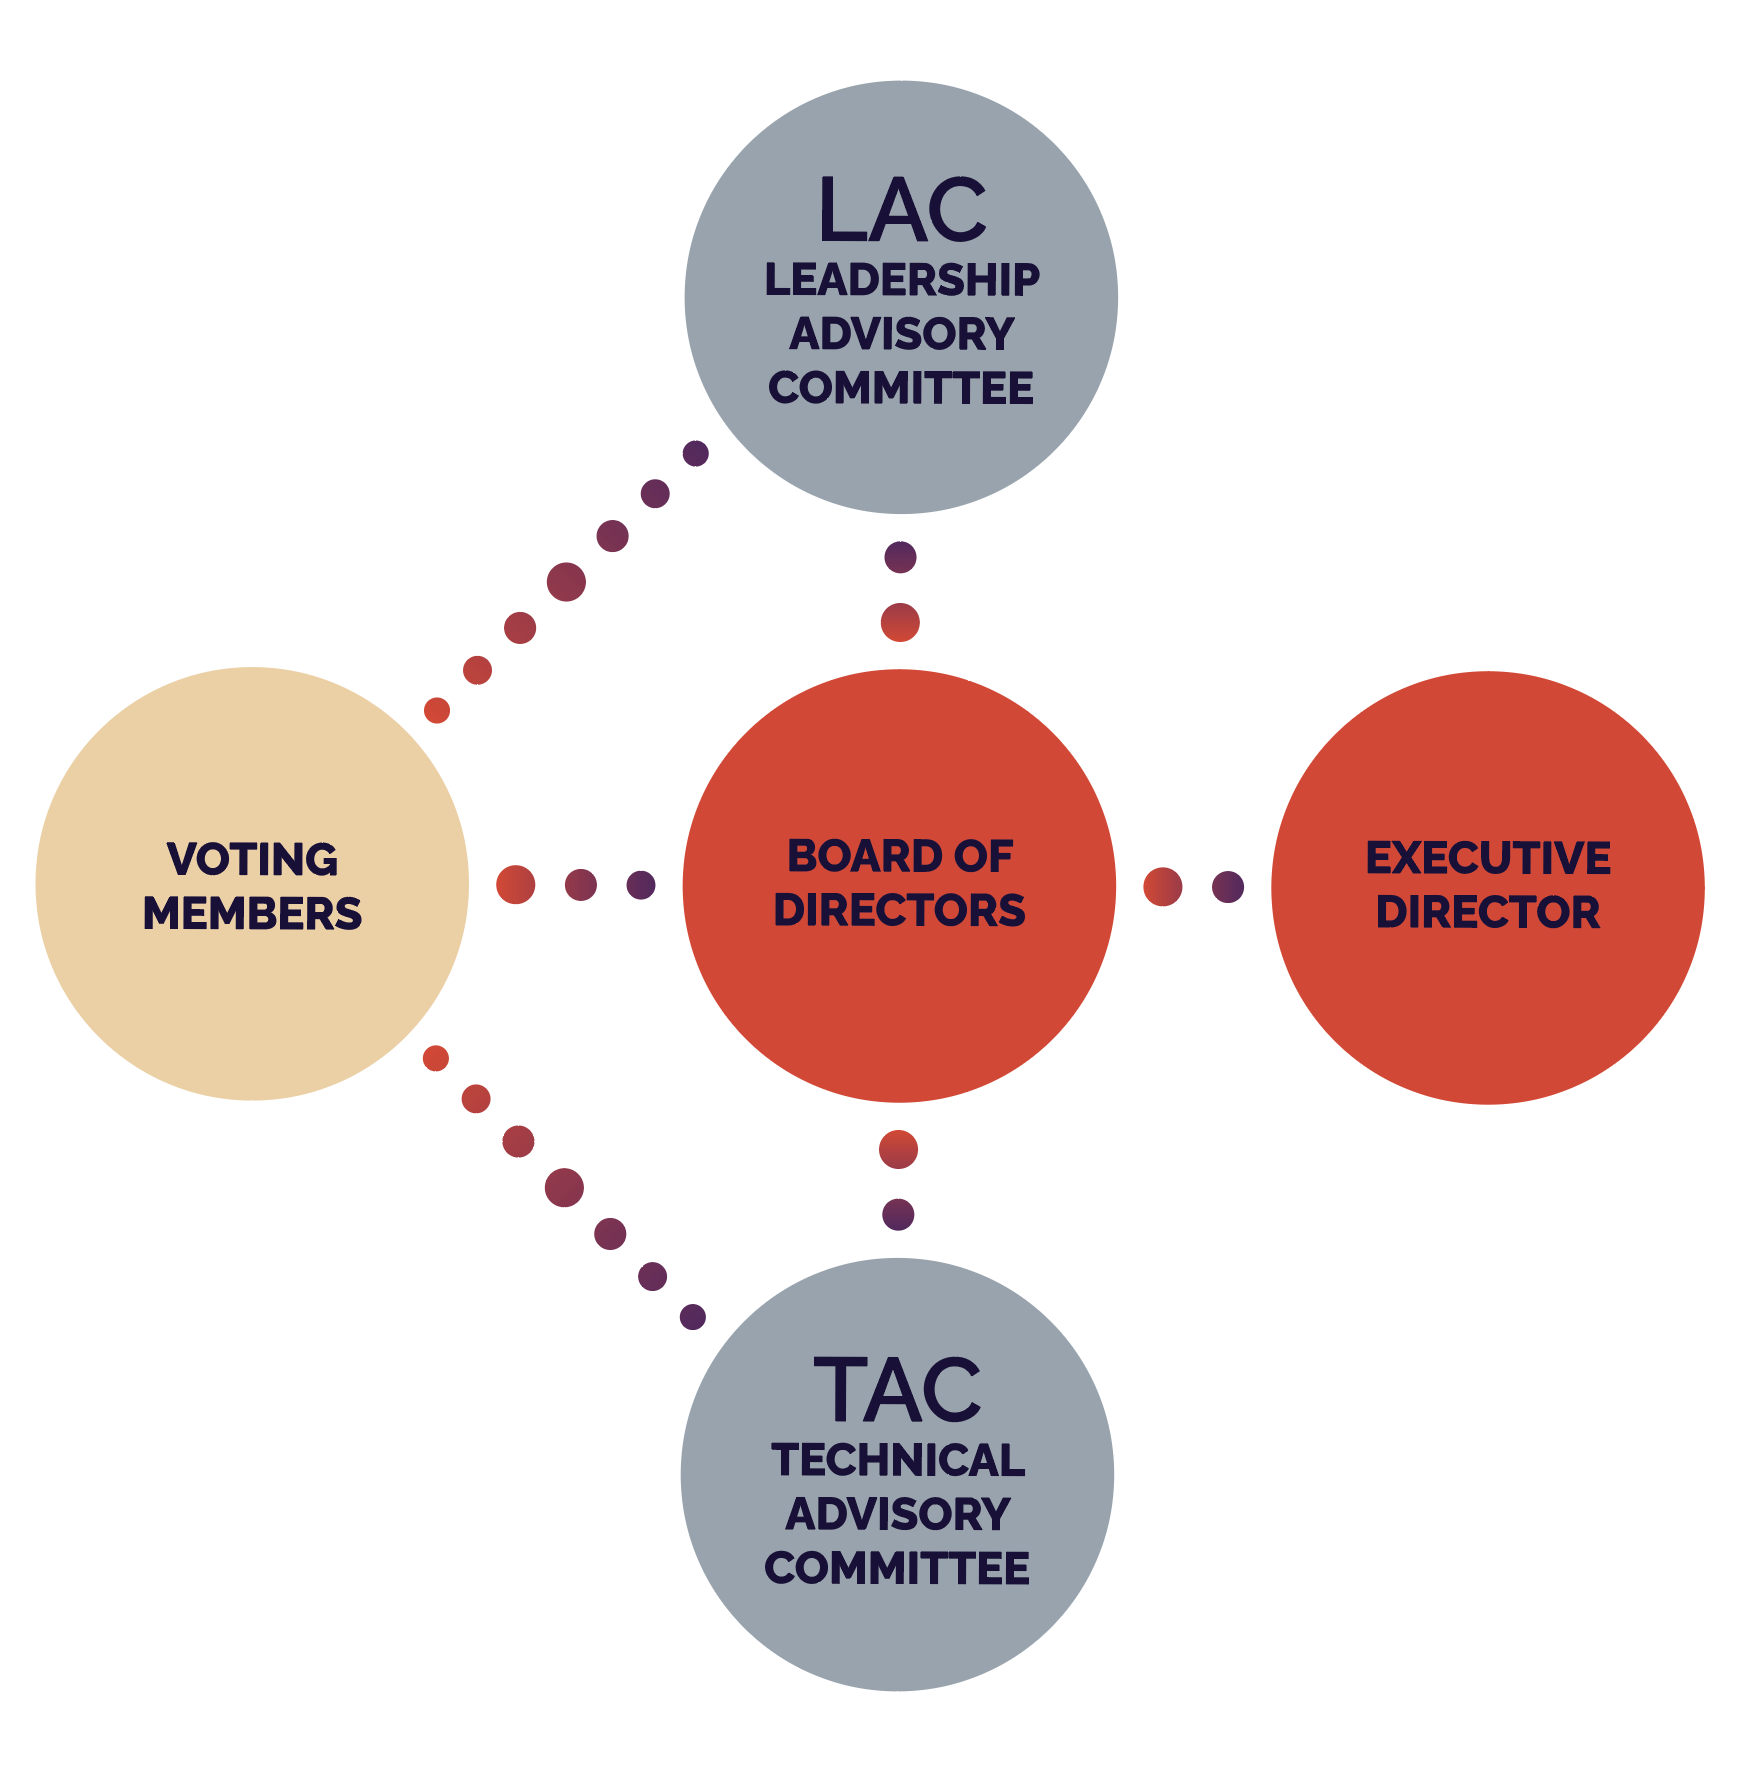 An infographic showing the structure of OFNTSC's Governance model which shows how the voting members break out into the Leadership Advisory Committee, the Board of Directors, and the Technical Advisory Committee. Lastly the Executive director comes from the Board of Directors in terms of reporting